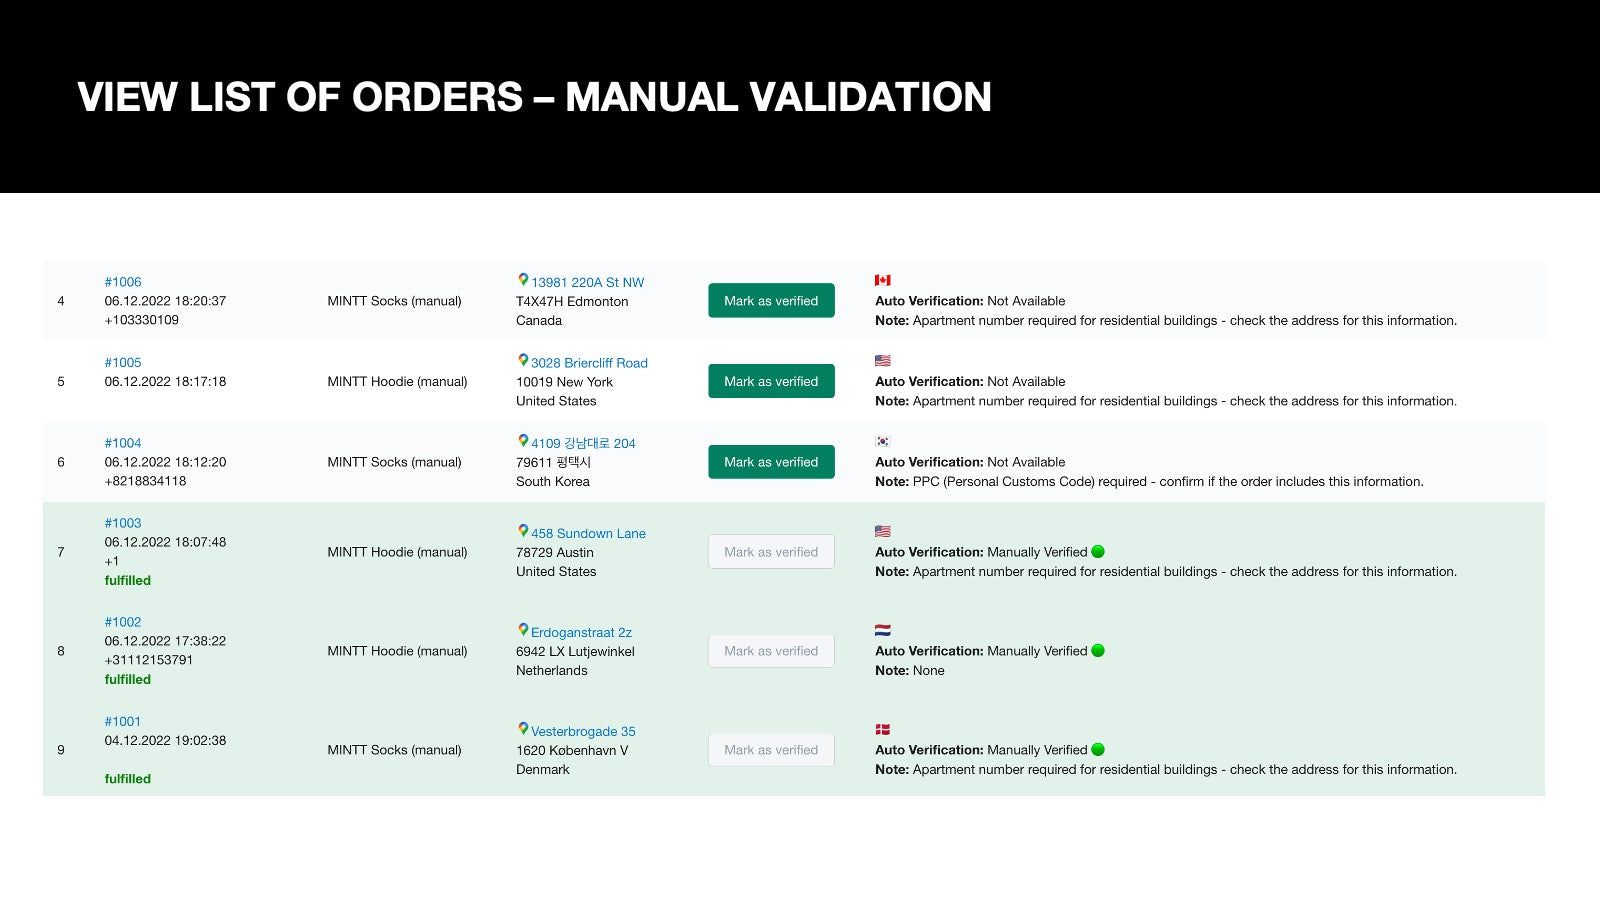 View list of orders - manual validation